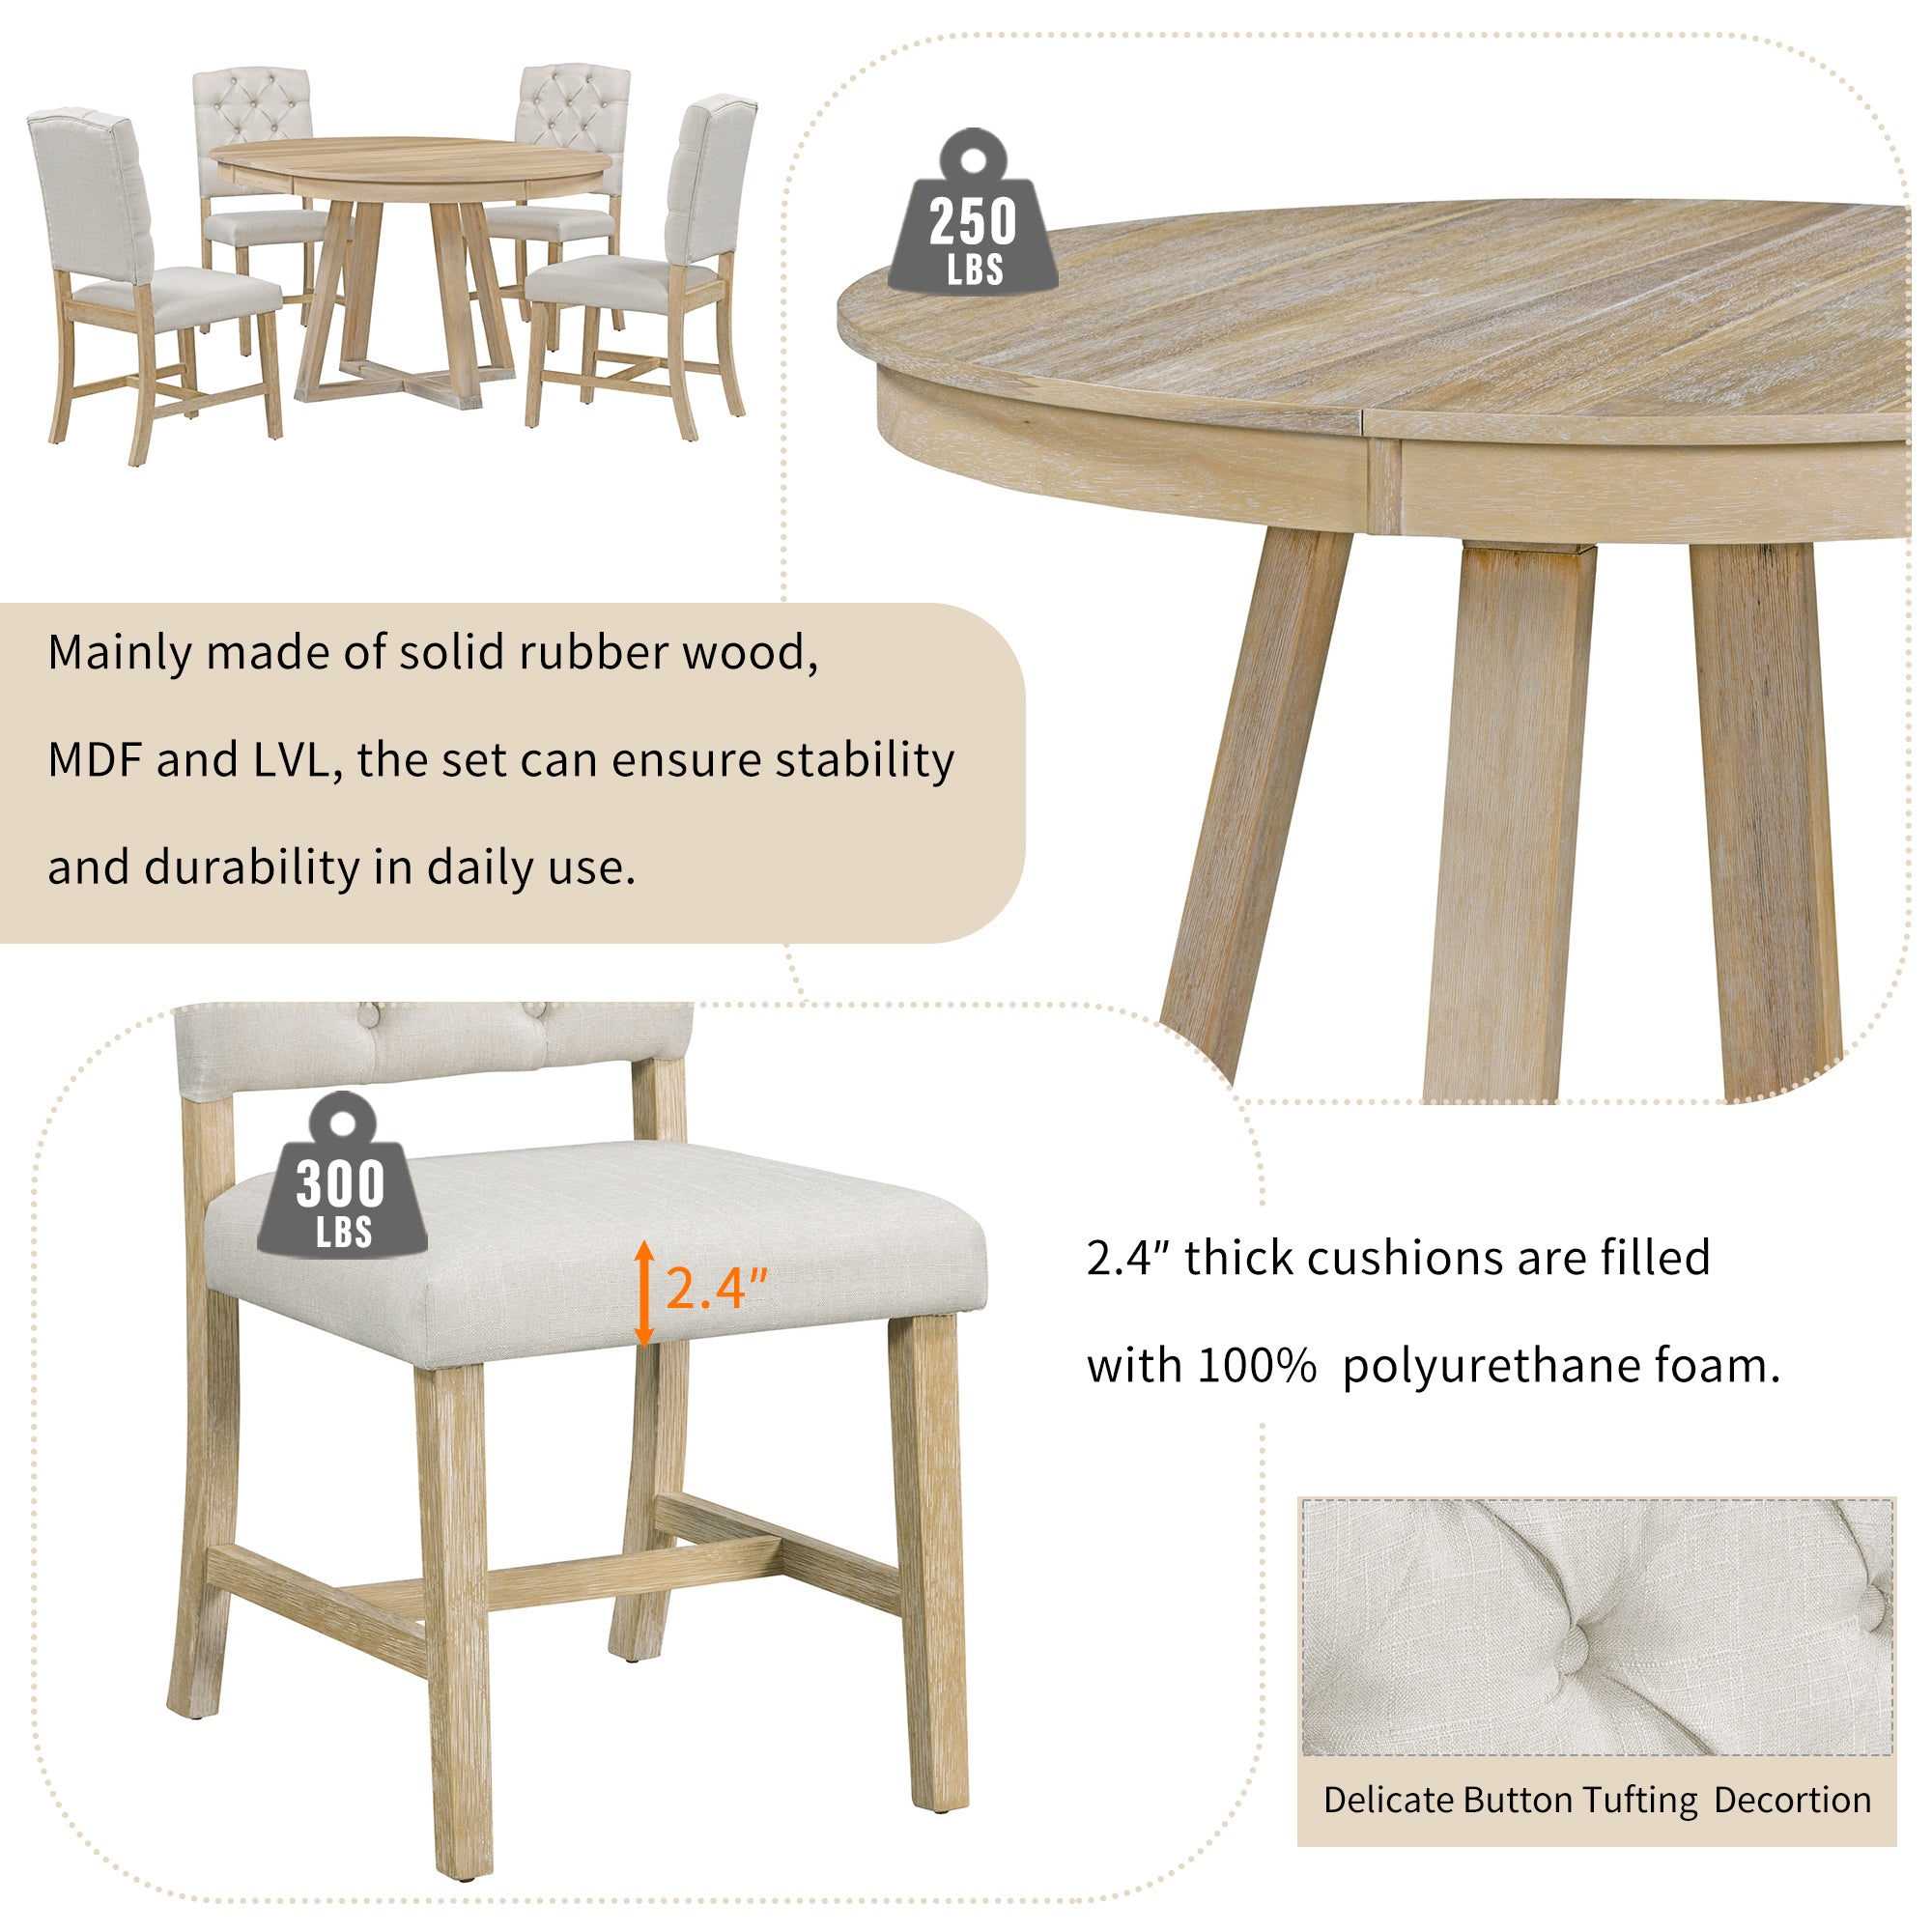 5 Piece Retro Functional Dining Set, Round Table natural-solid wood